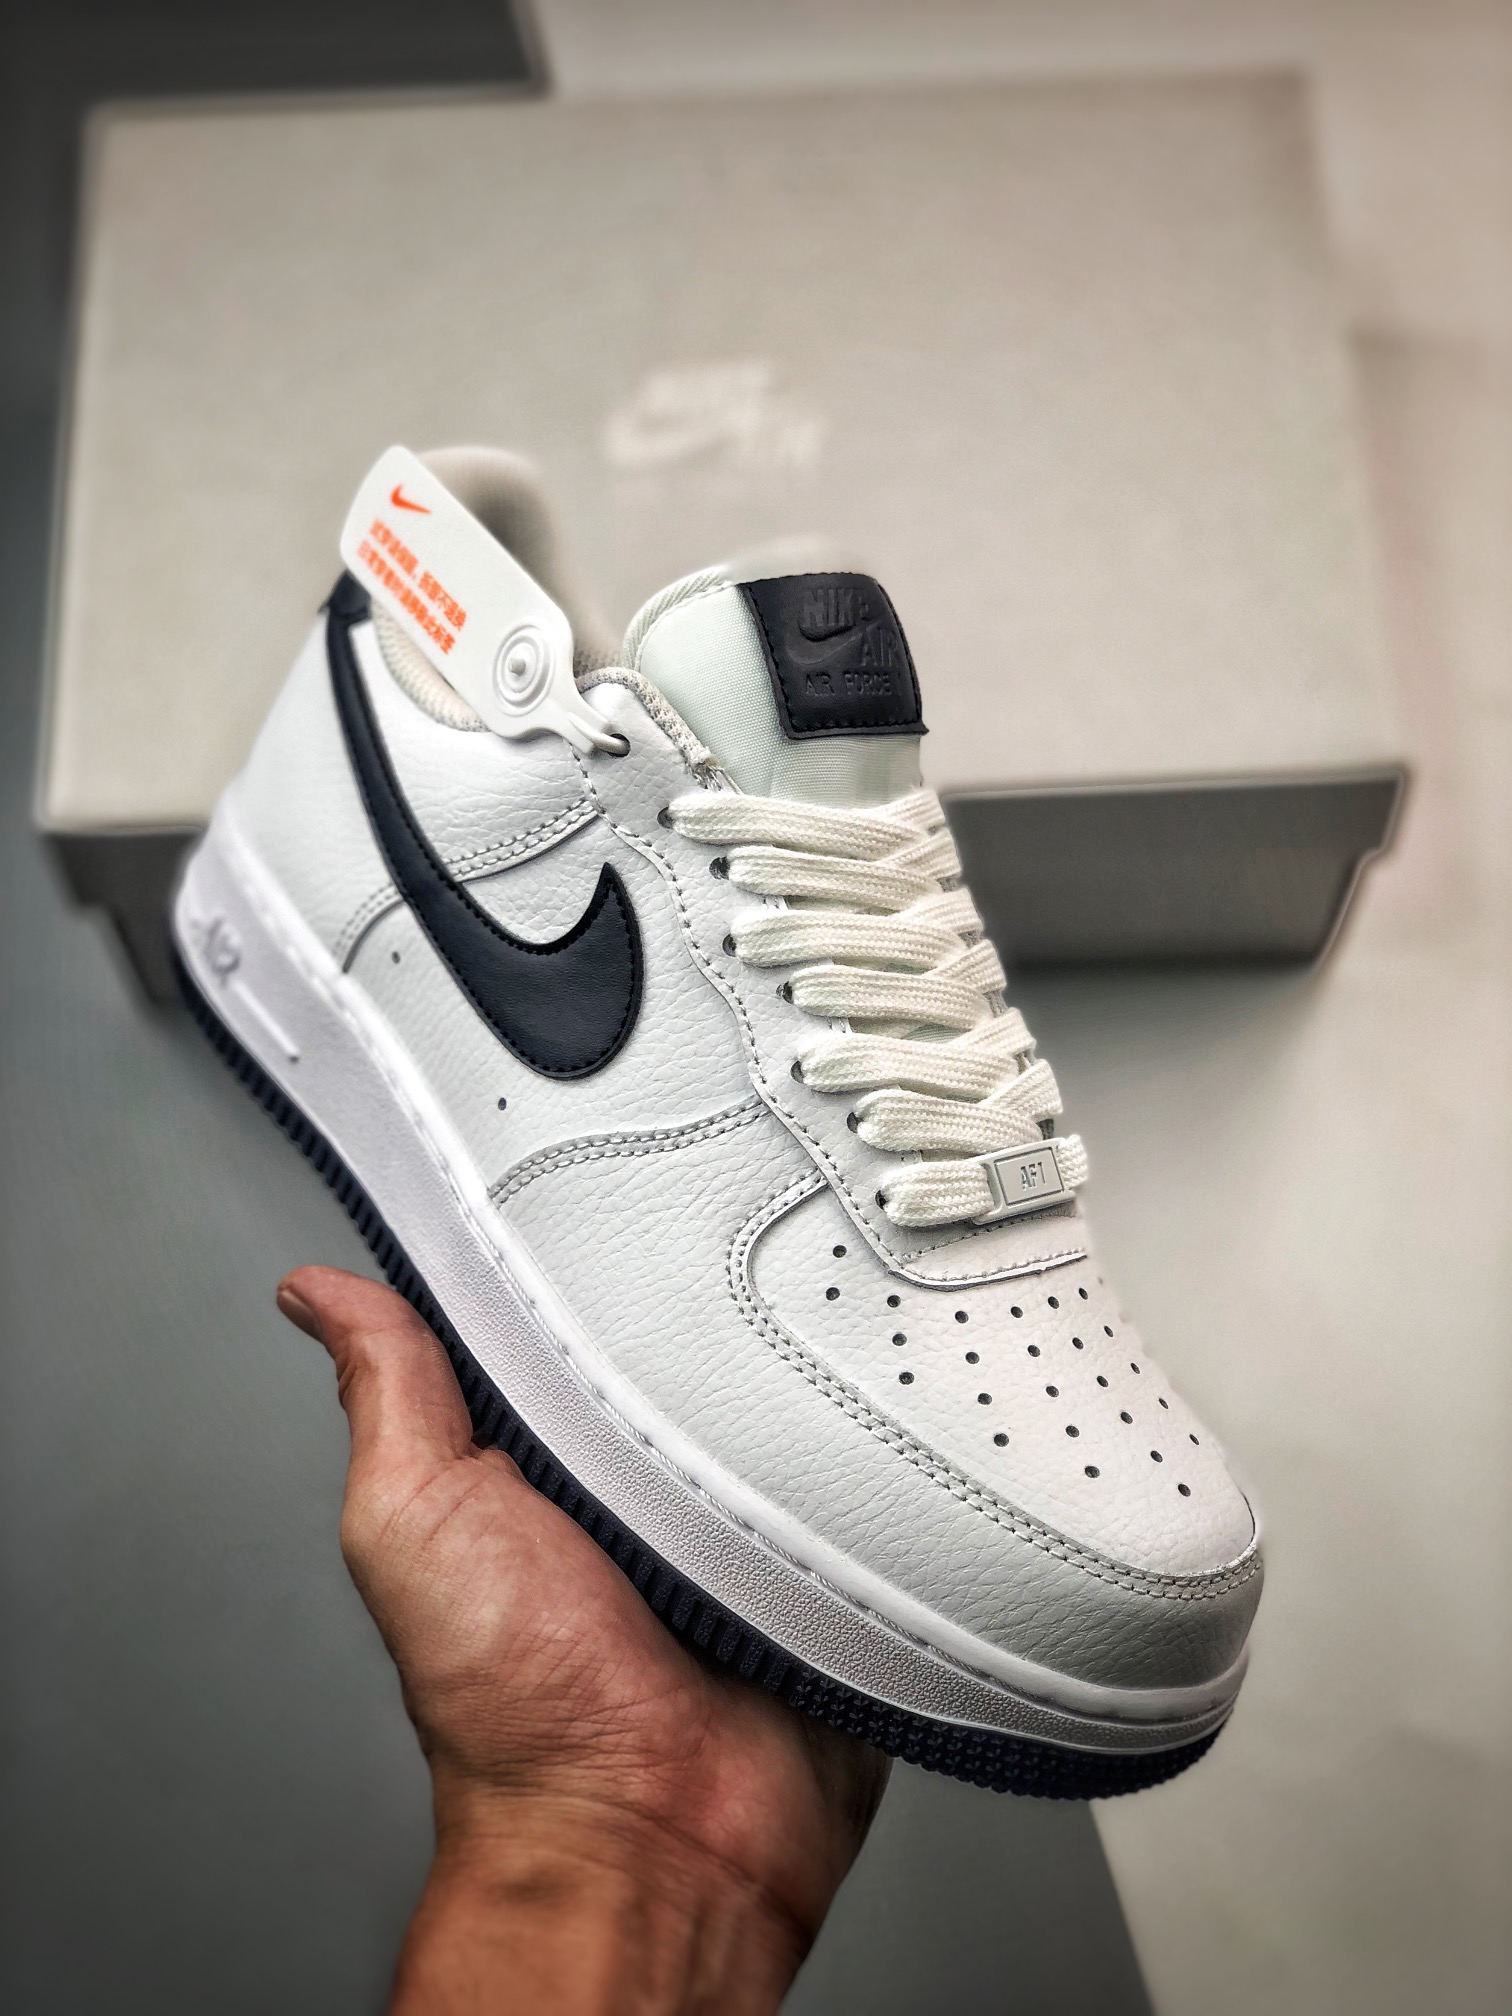 Nike Air AF Force 1 Low 07 White Obsidian AH0287-108 Shoes